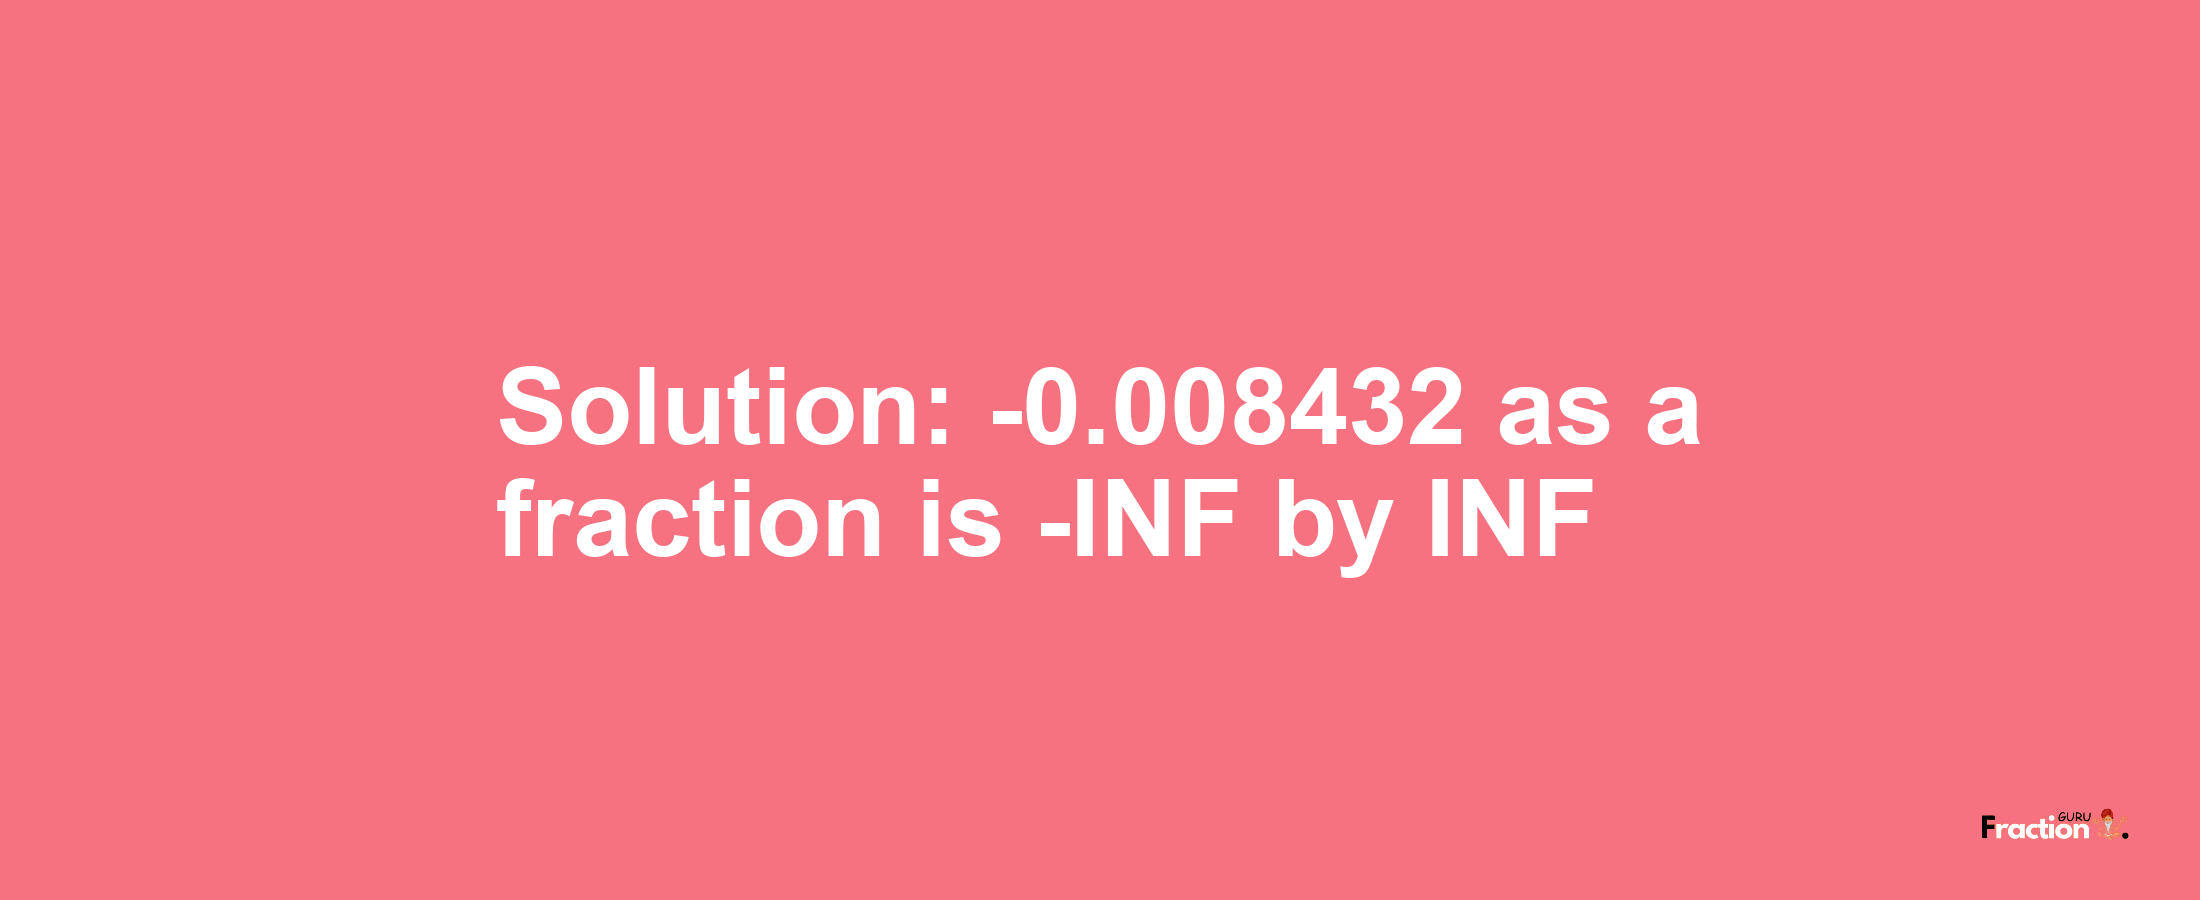 Solution:-0.008432 as a fraction is -INF/INF